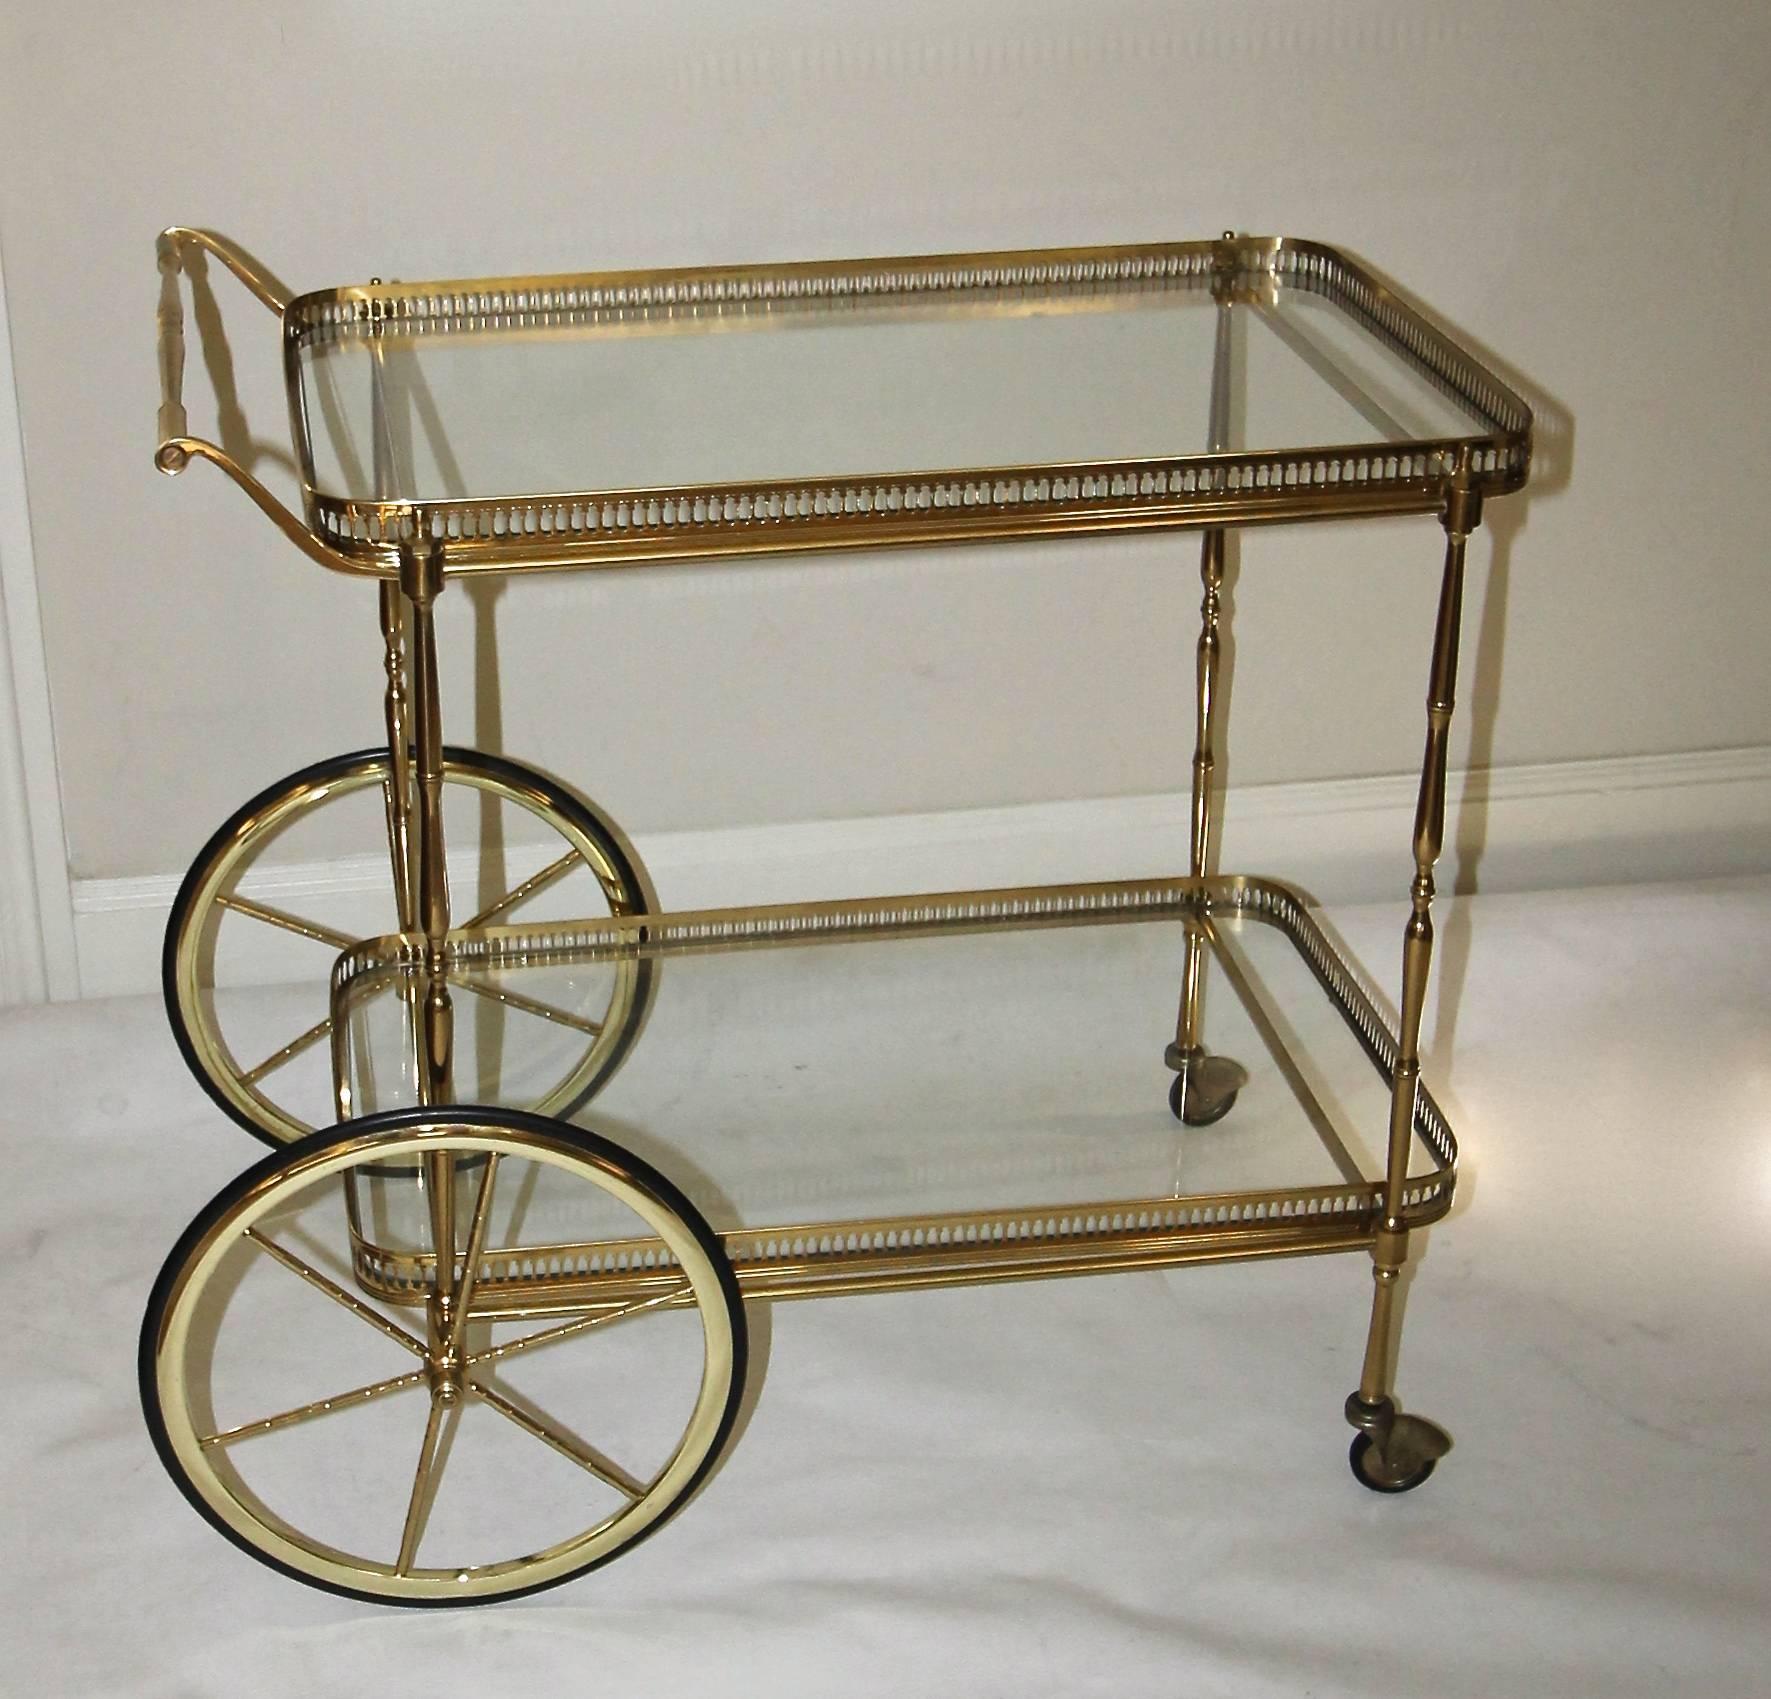 Vintage French brass bar cart with 2 tier glass inset shelves. Overall height to top handle 27.5